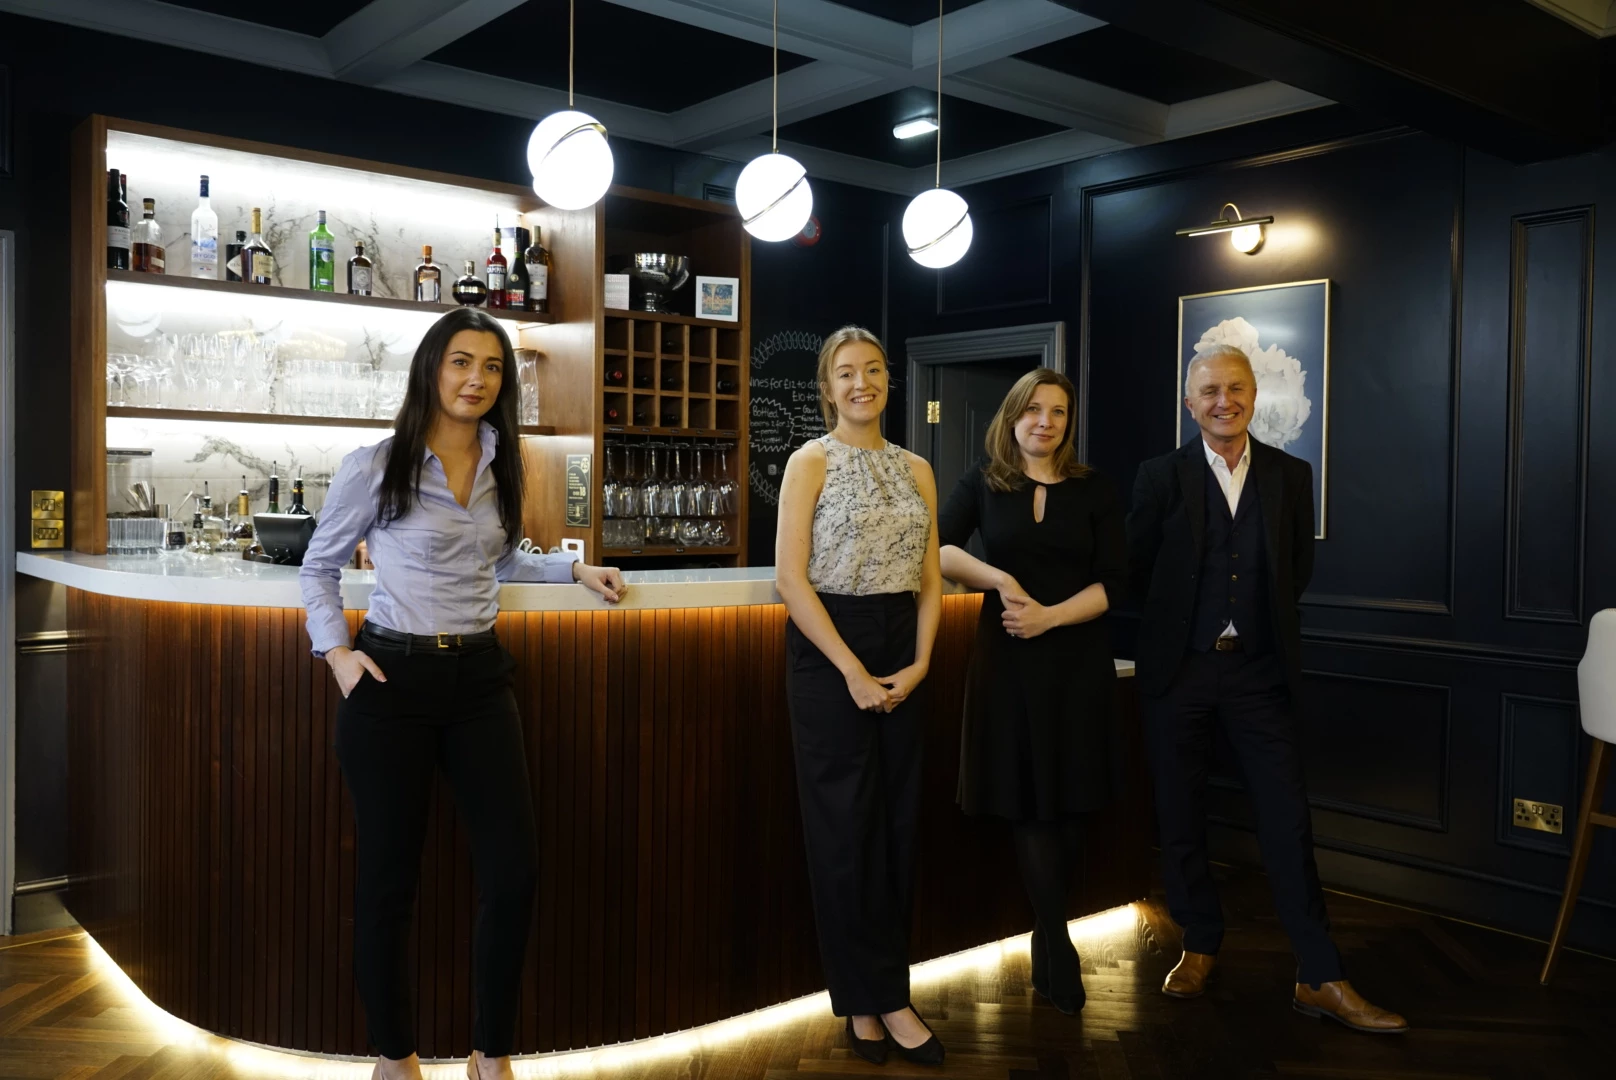 Amy Byram, founder of Empire House; Ellie Hirst, private client solicitor; Sarah Power, partner and head of family law; Howard Willis, partner; all of Chadwick Lawrence